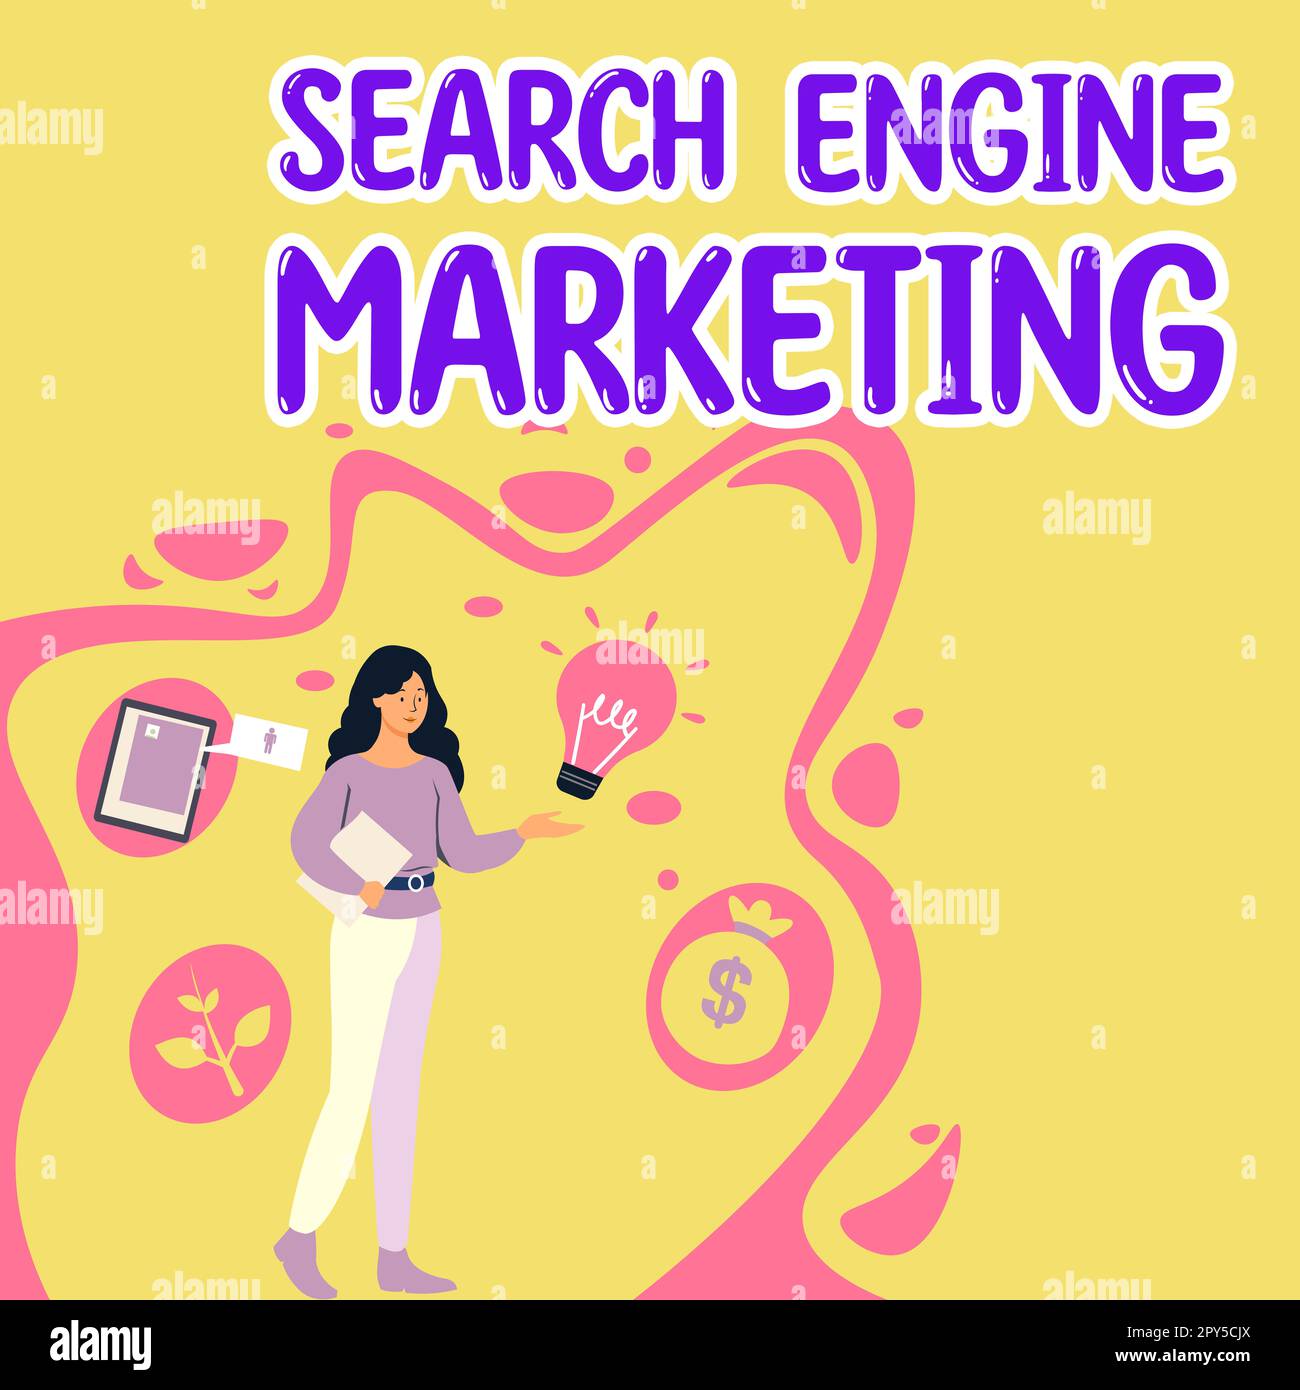 Text showing inspiration Search Engine Marketing. Business overview promote Website visibility on searched result pages Stock Photo